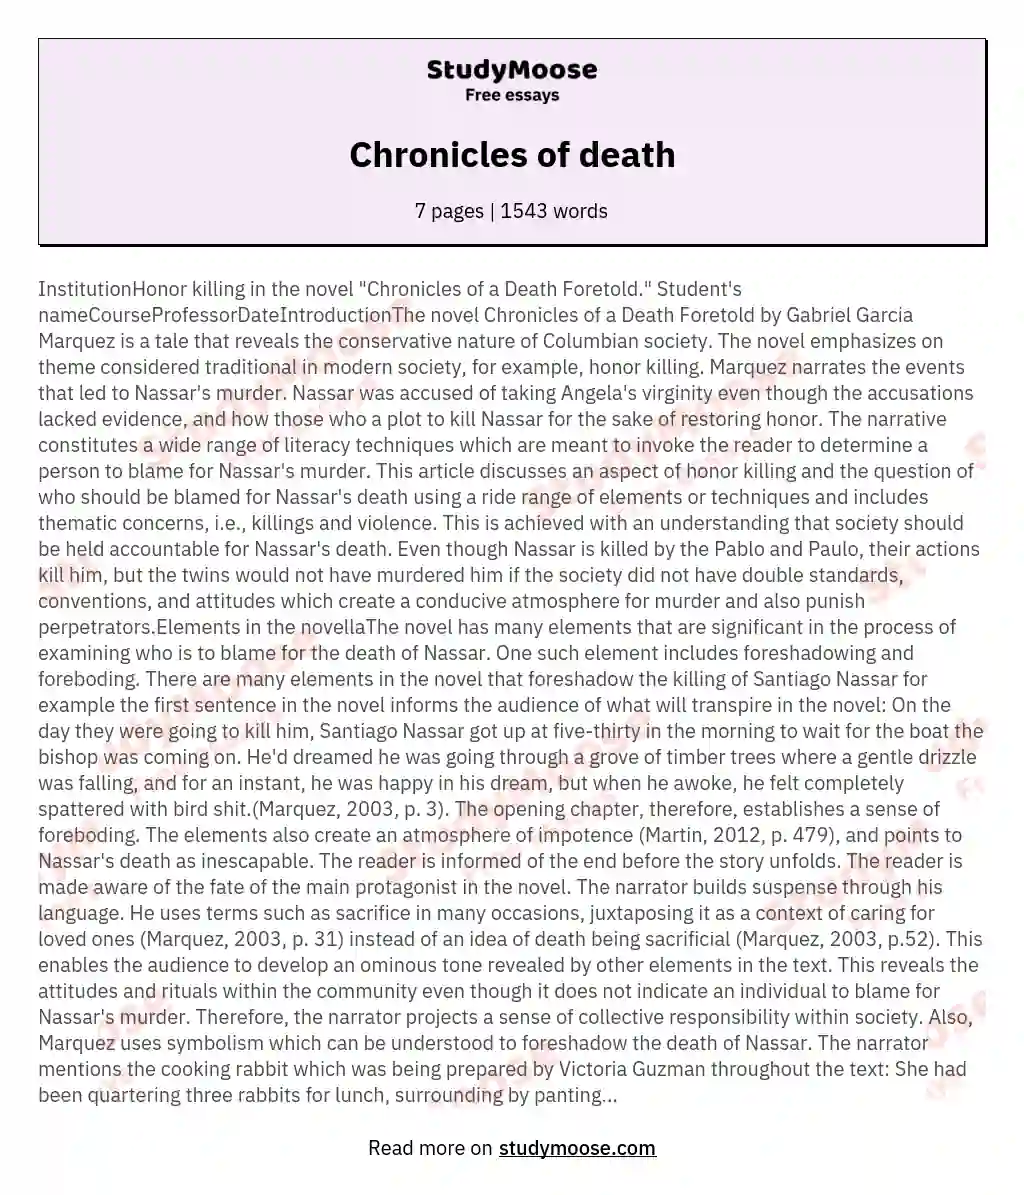 Chronicles of death essay